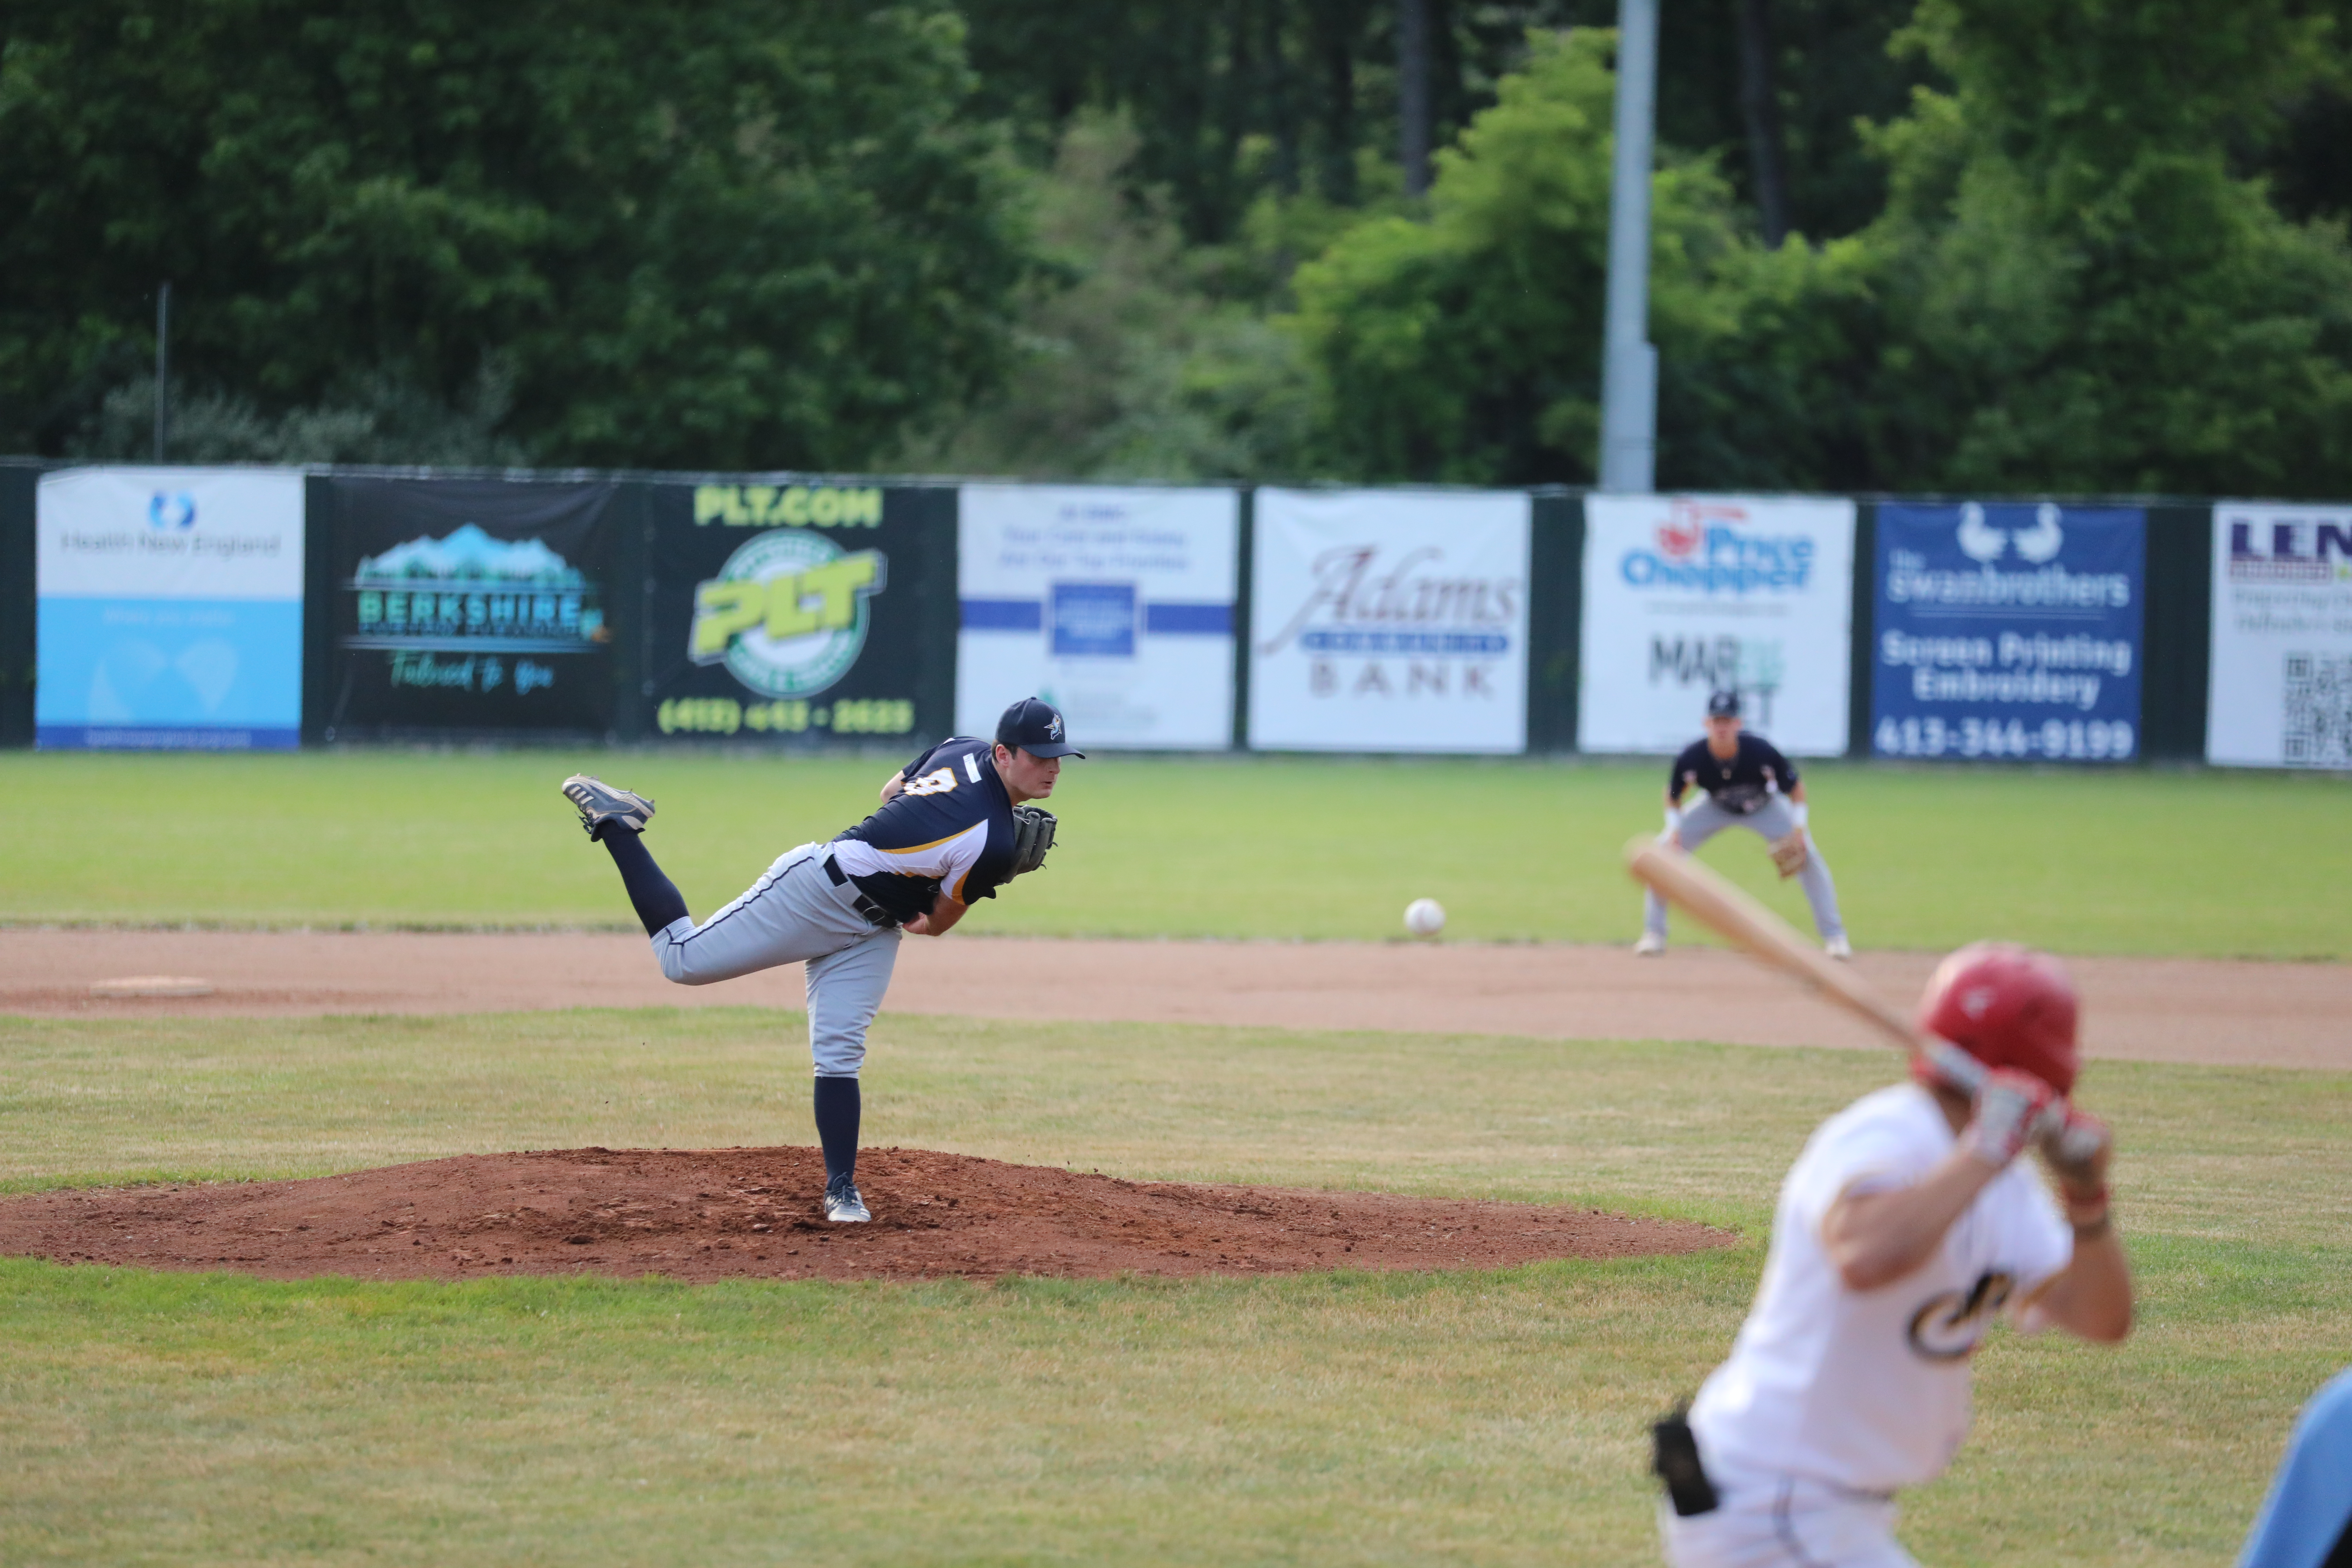 Ryan Donahue ties Westfield Starfires record with 13 strikeouts during 8-0 win over Brockton Rox